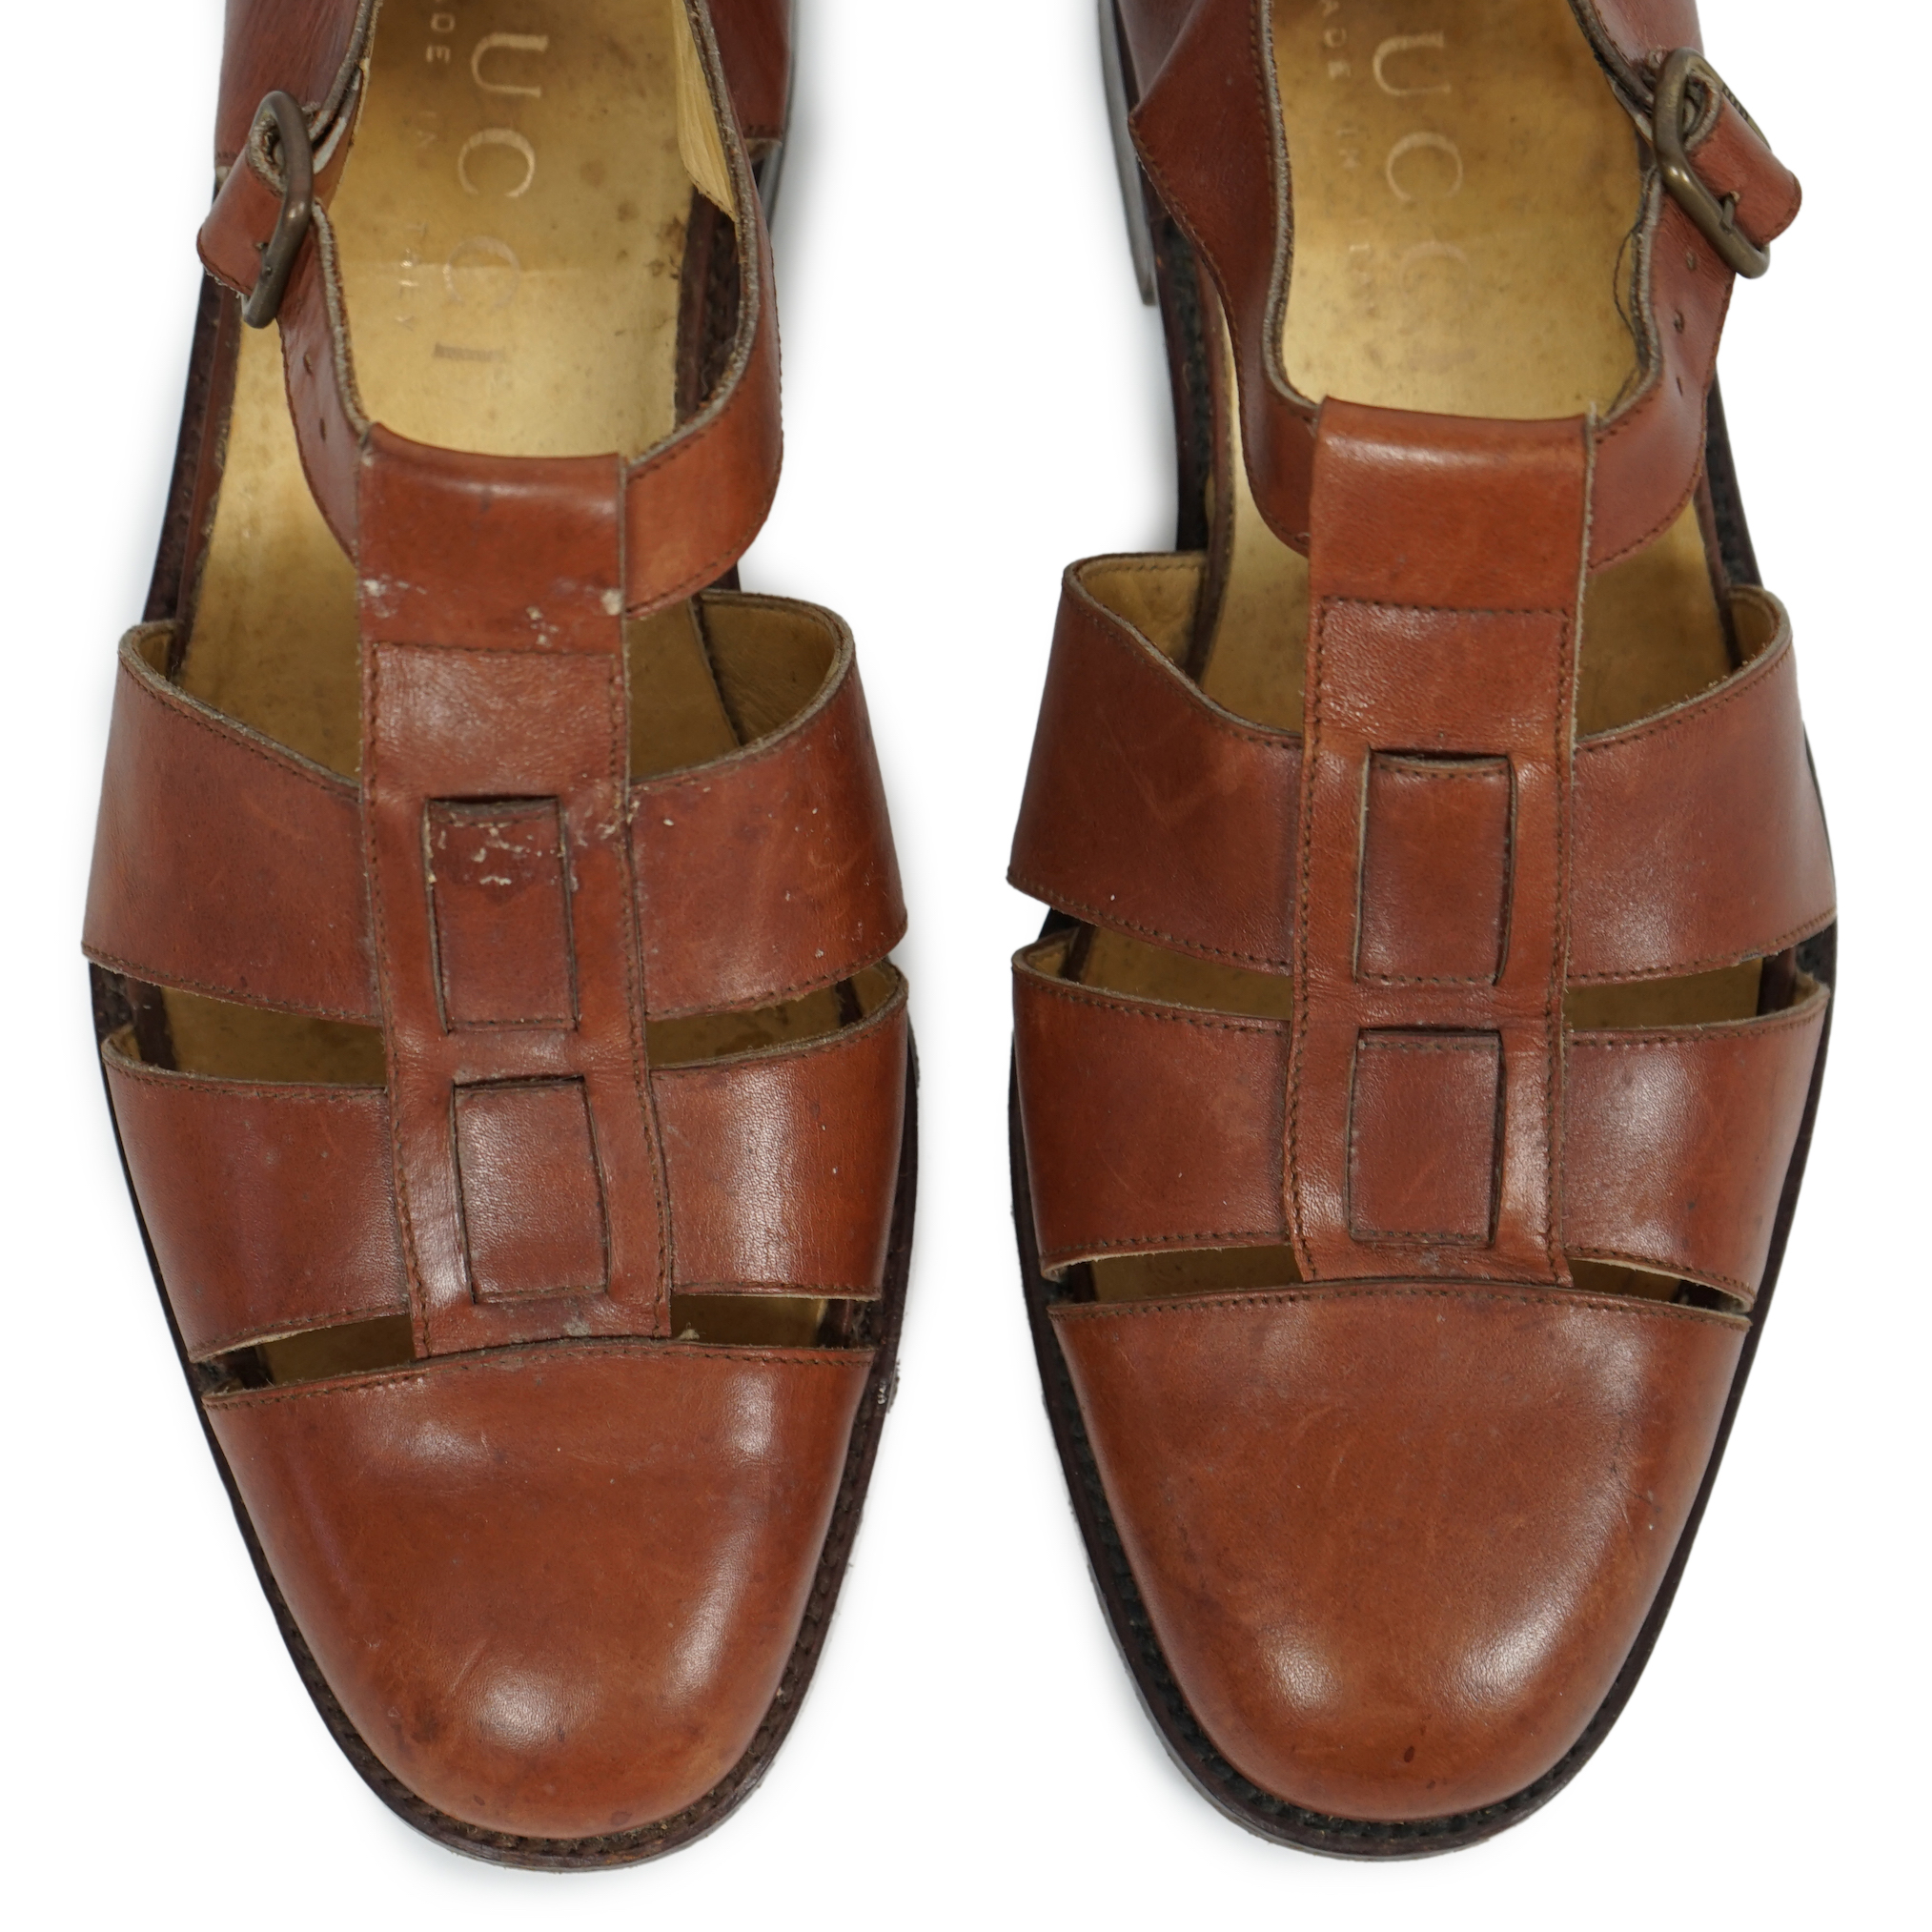 A pair of Gucci gentleman's tan leather sandals, size 42